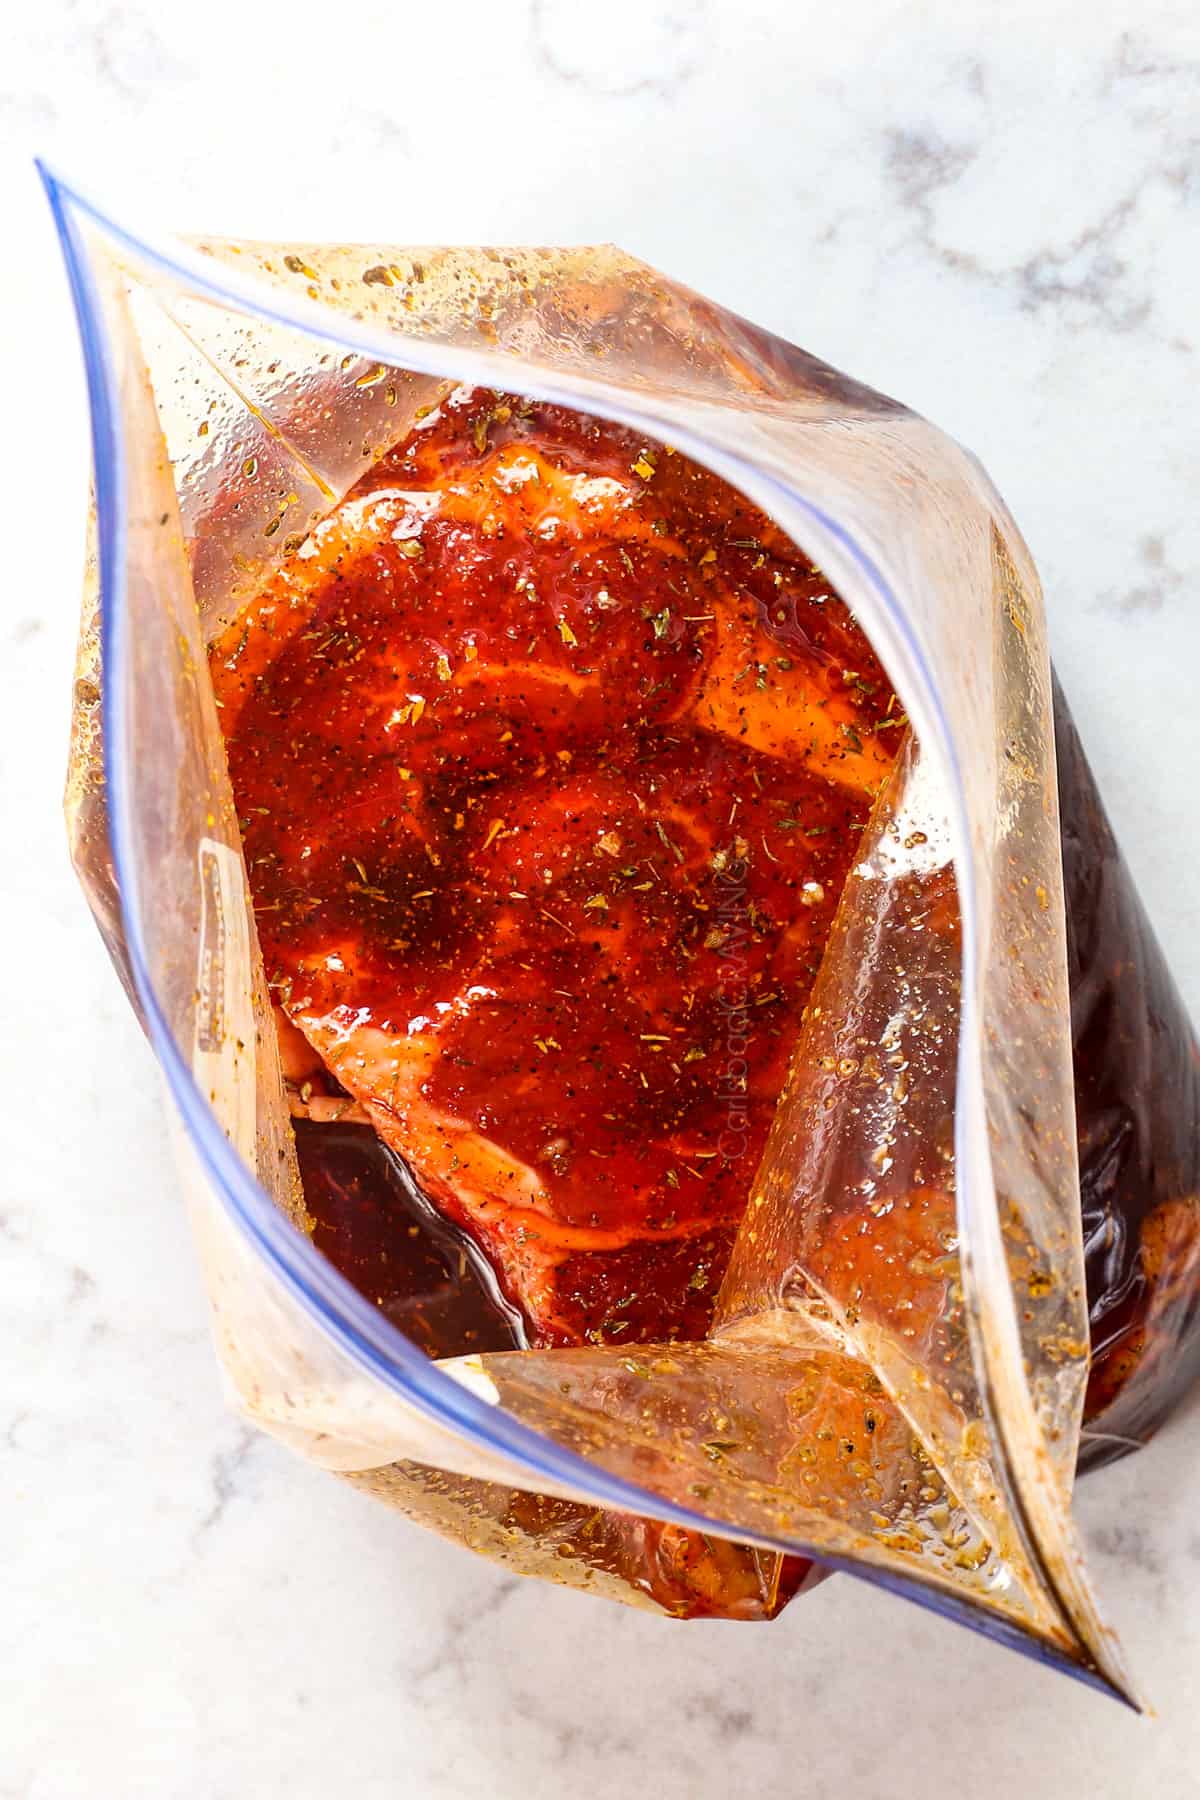 showing how to make steak marinade by adding the steak to the marinade and turning to coat